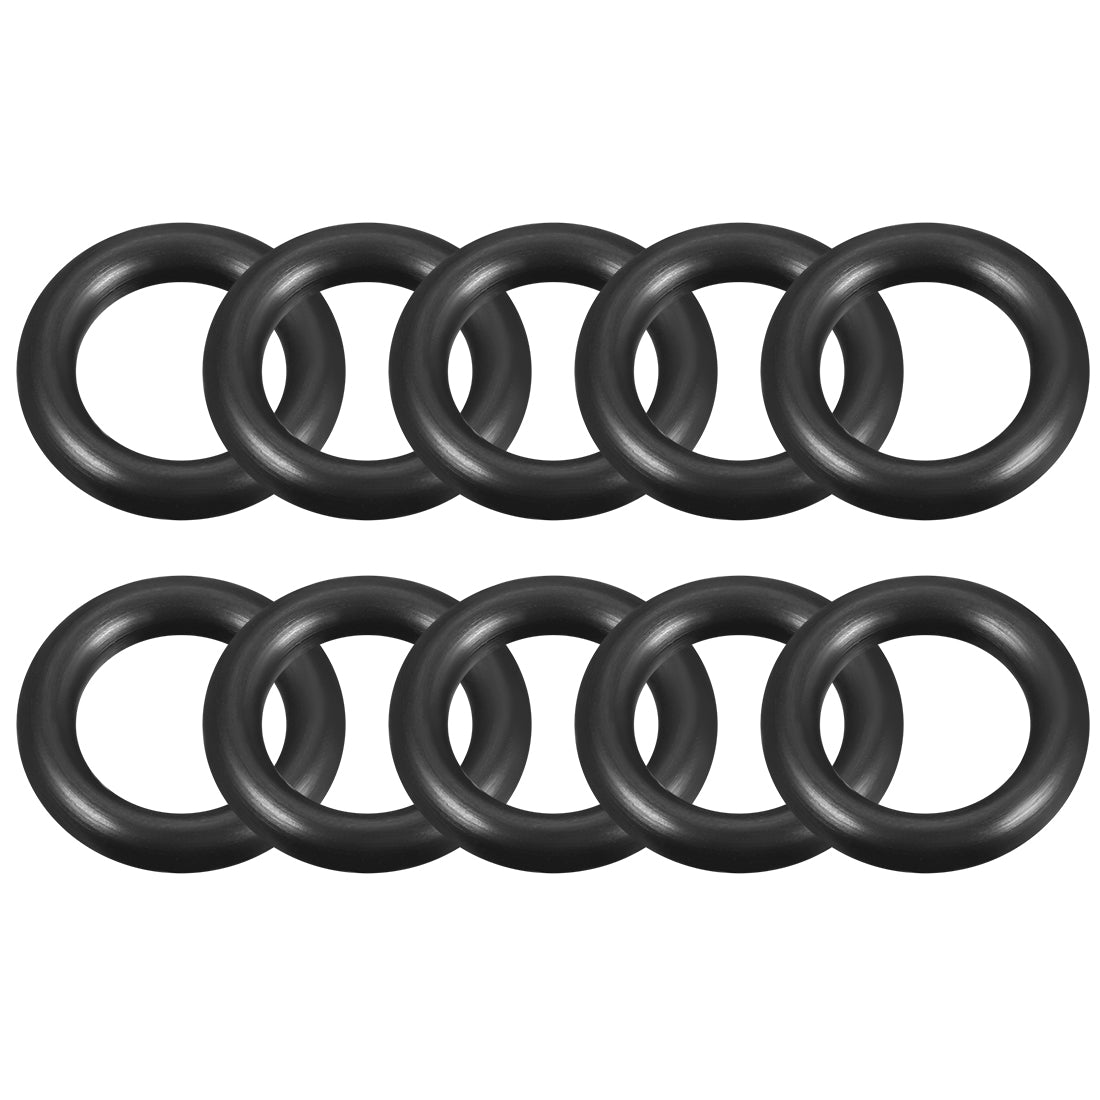 uxcell Uxcell O-Rings Nitrile Rubber 18mm x 28mm x 5mm Seal Rings Sealing Gasket 10pcs